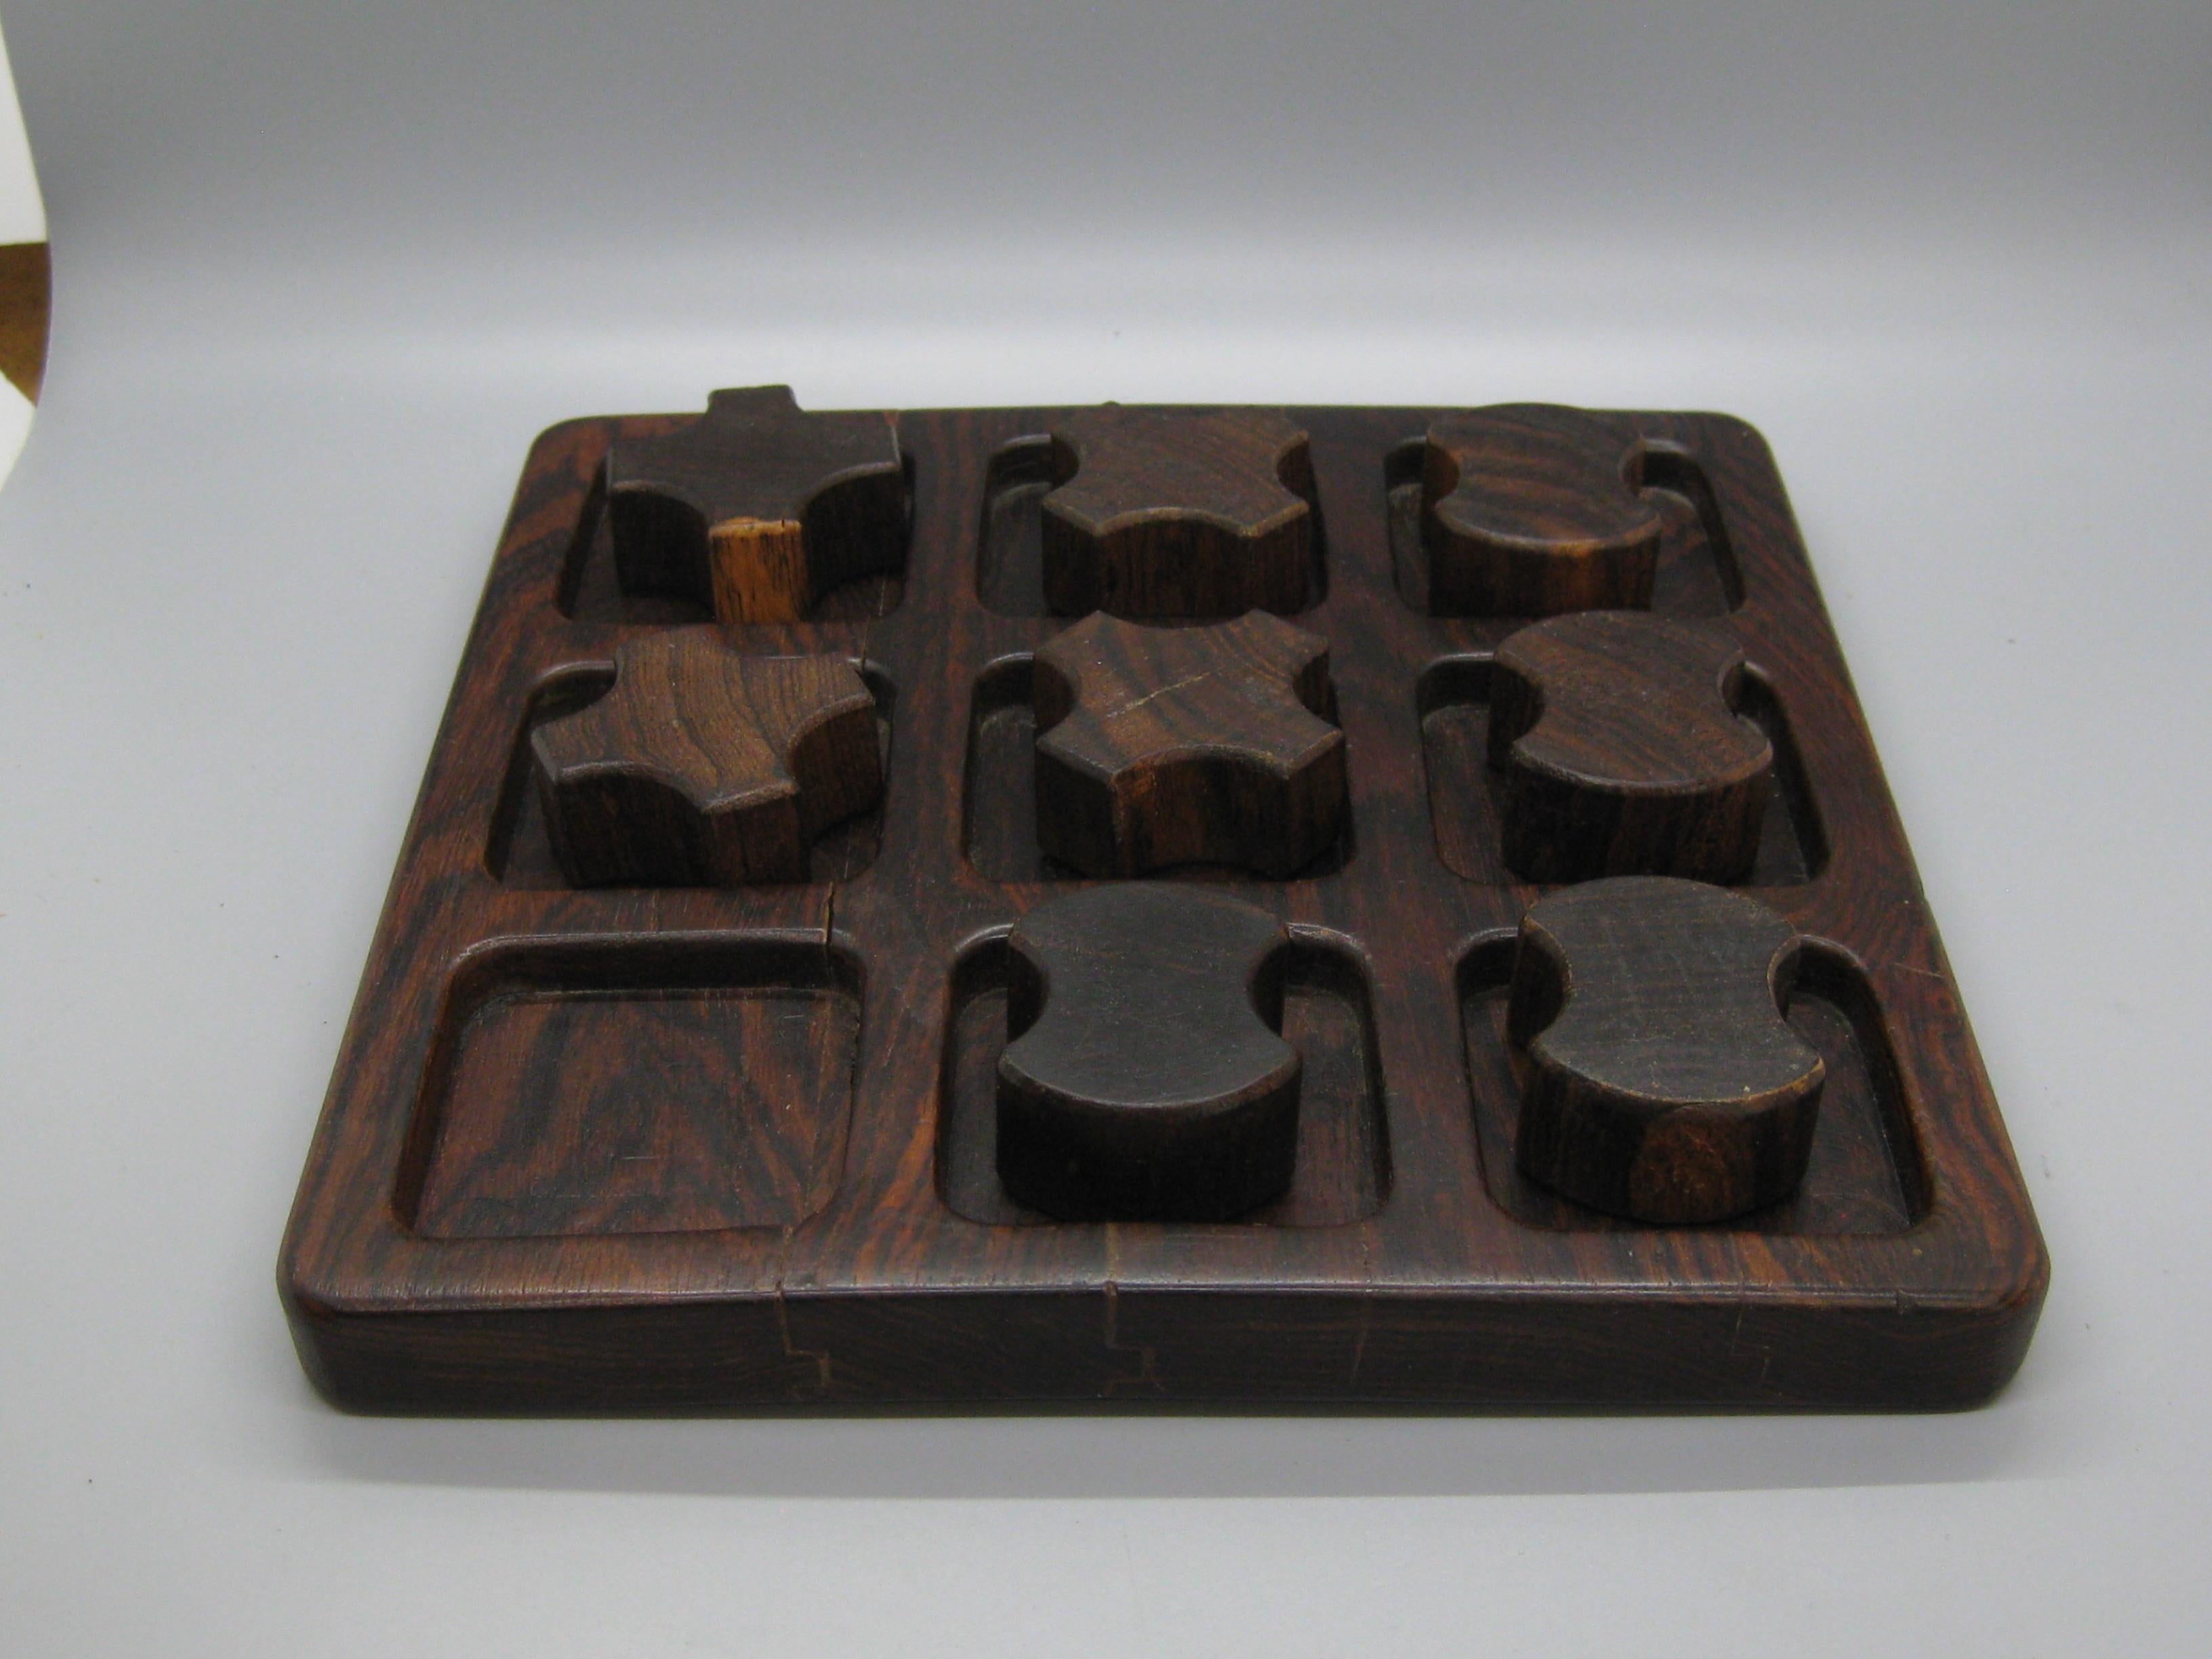 Fantastic hand made Don S. Shoemaker designed tic-tac-toe game for Senal and dates from the 1960's. Made of beautiful rosewood. Has the original artists tag on the bottom. The game is complete and displays well. Wonderful color and grain in the